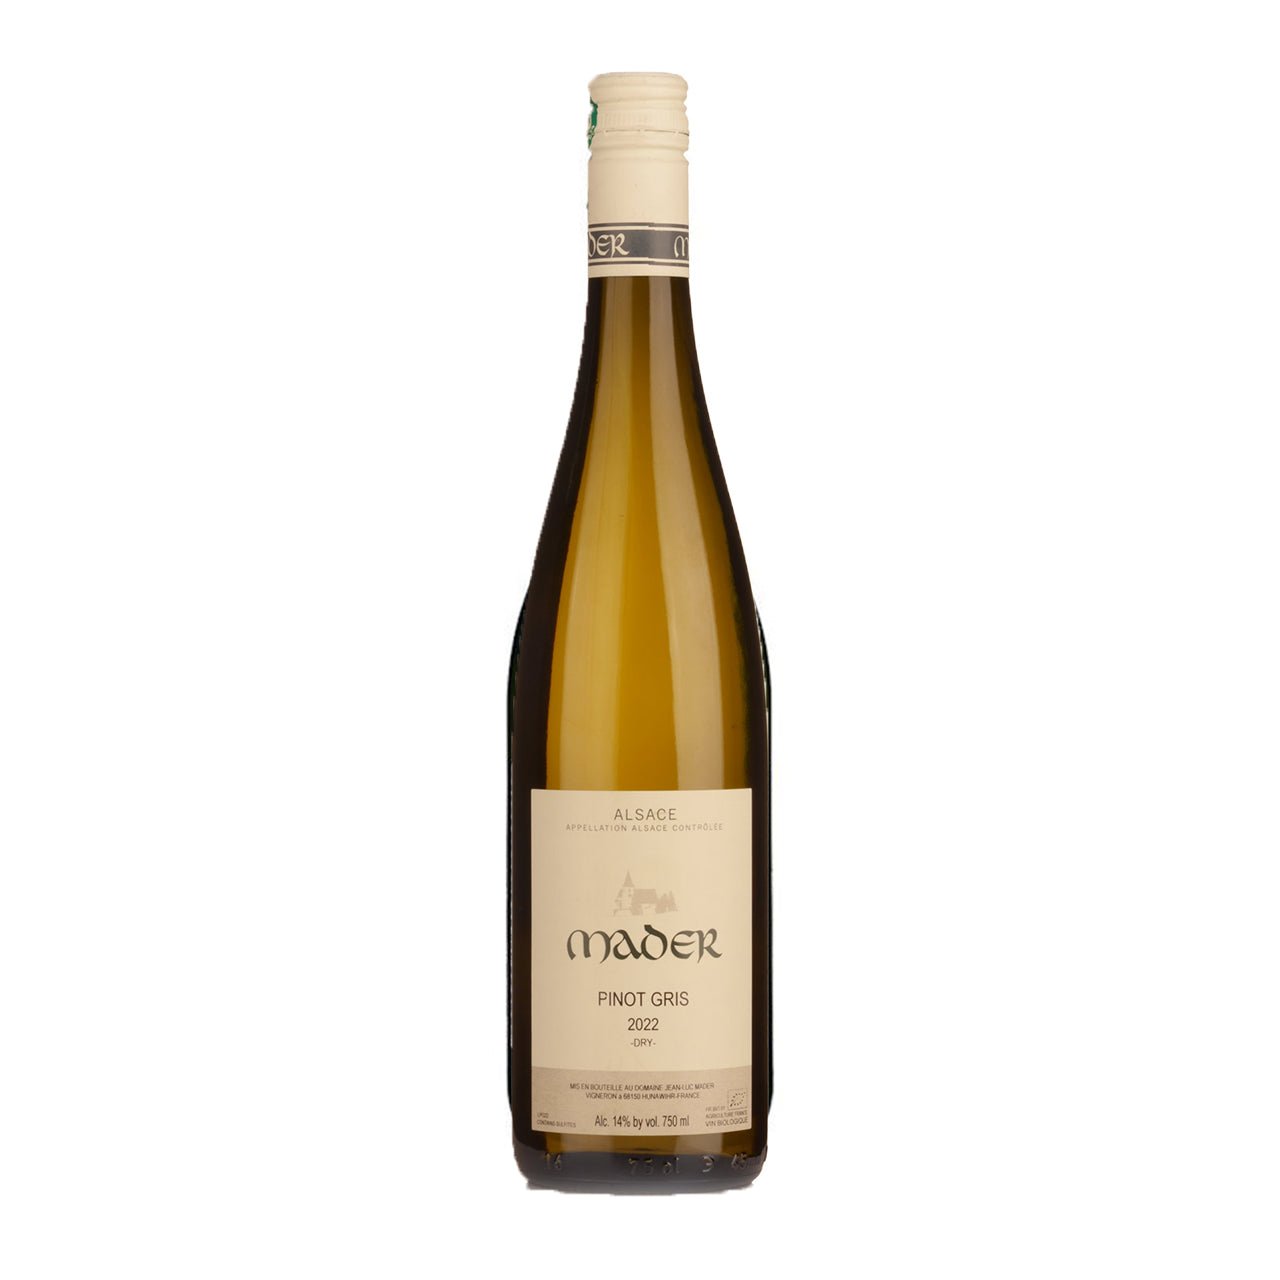 Mader Pinot Gris 2022 - Wine France White - Liquor Wine Cave